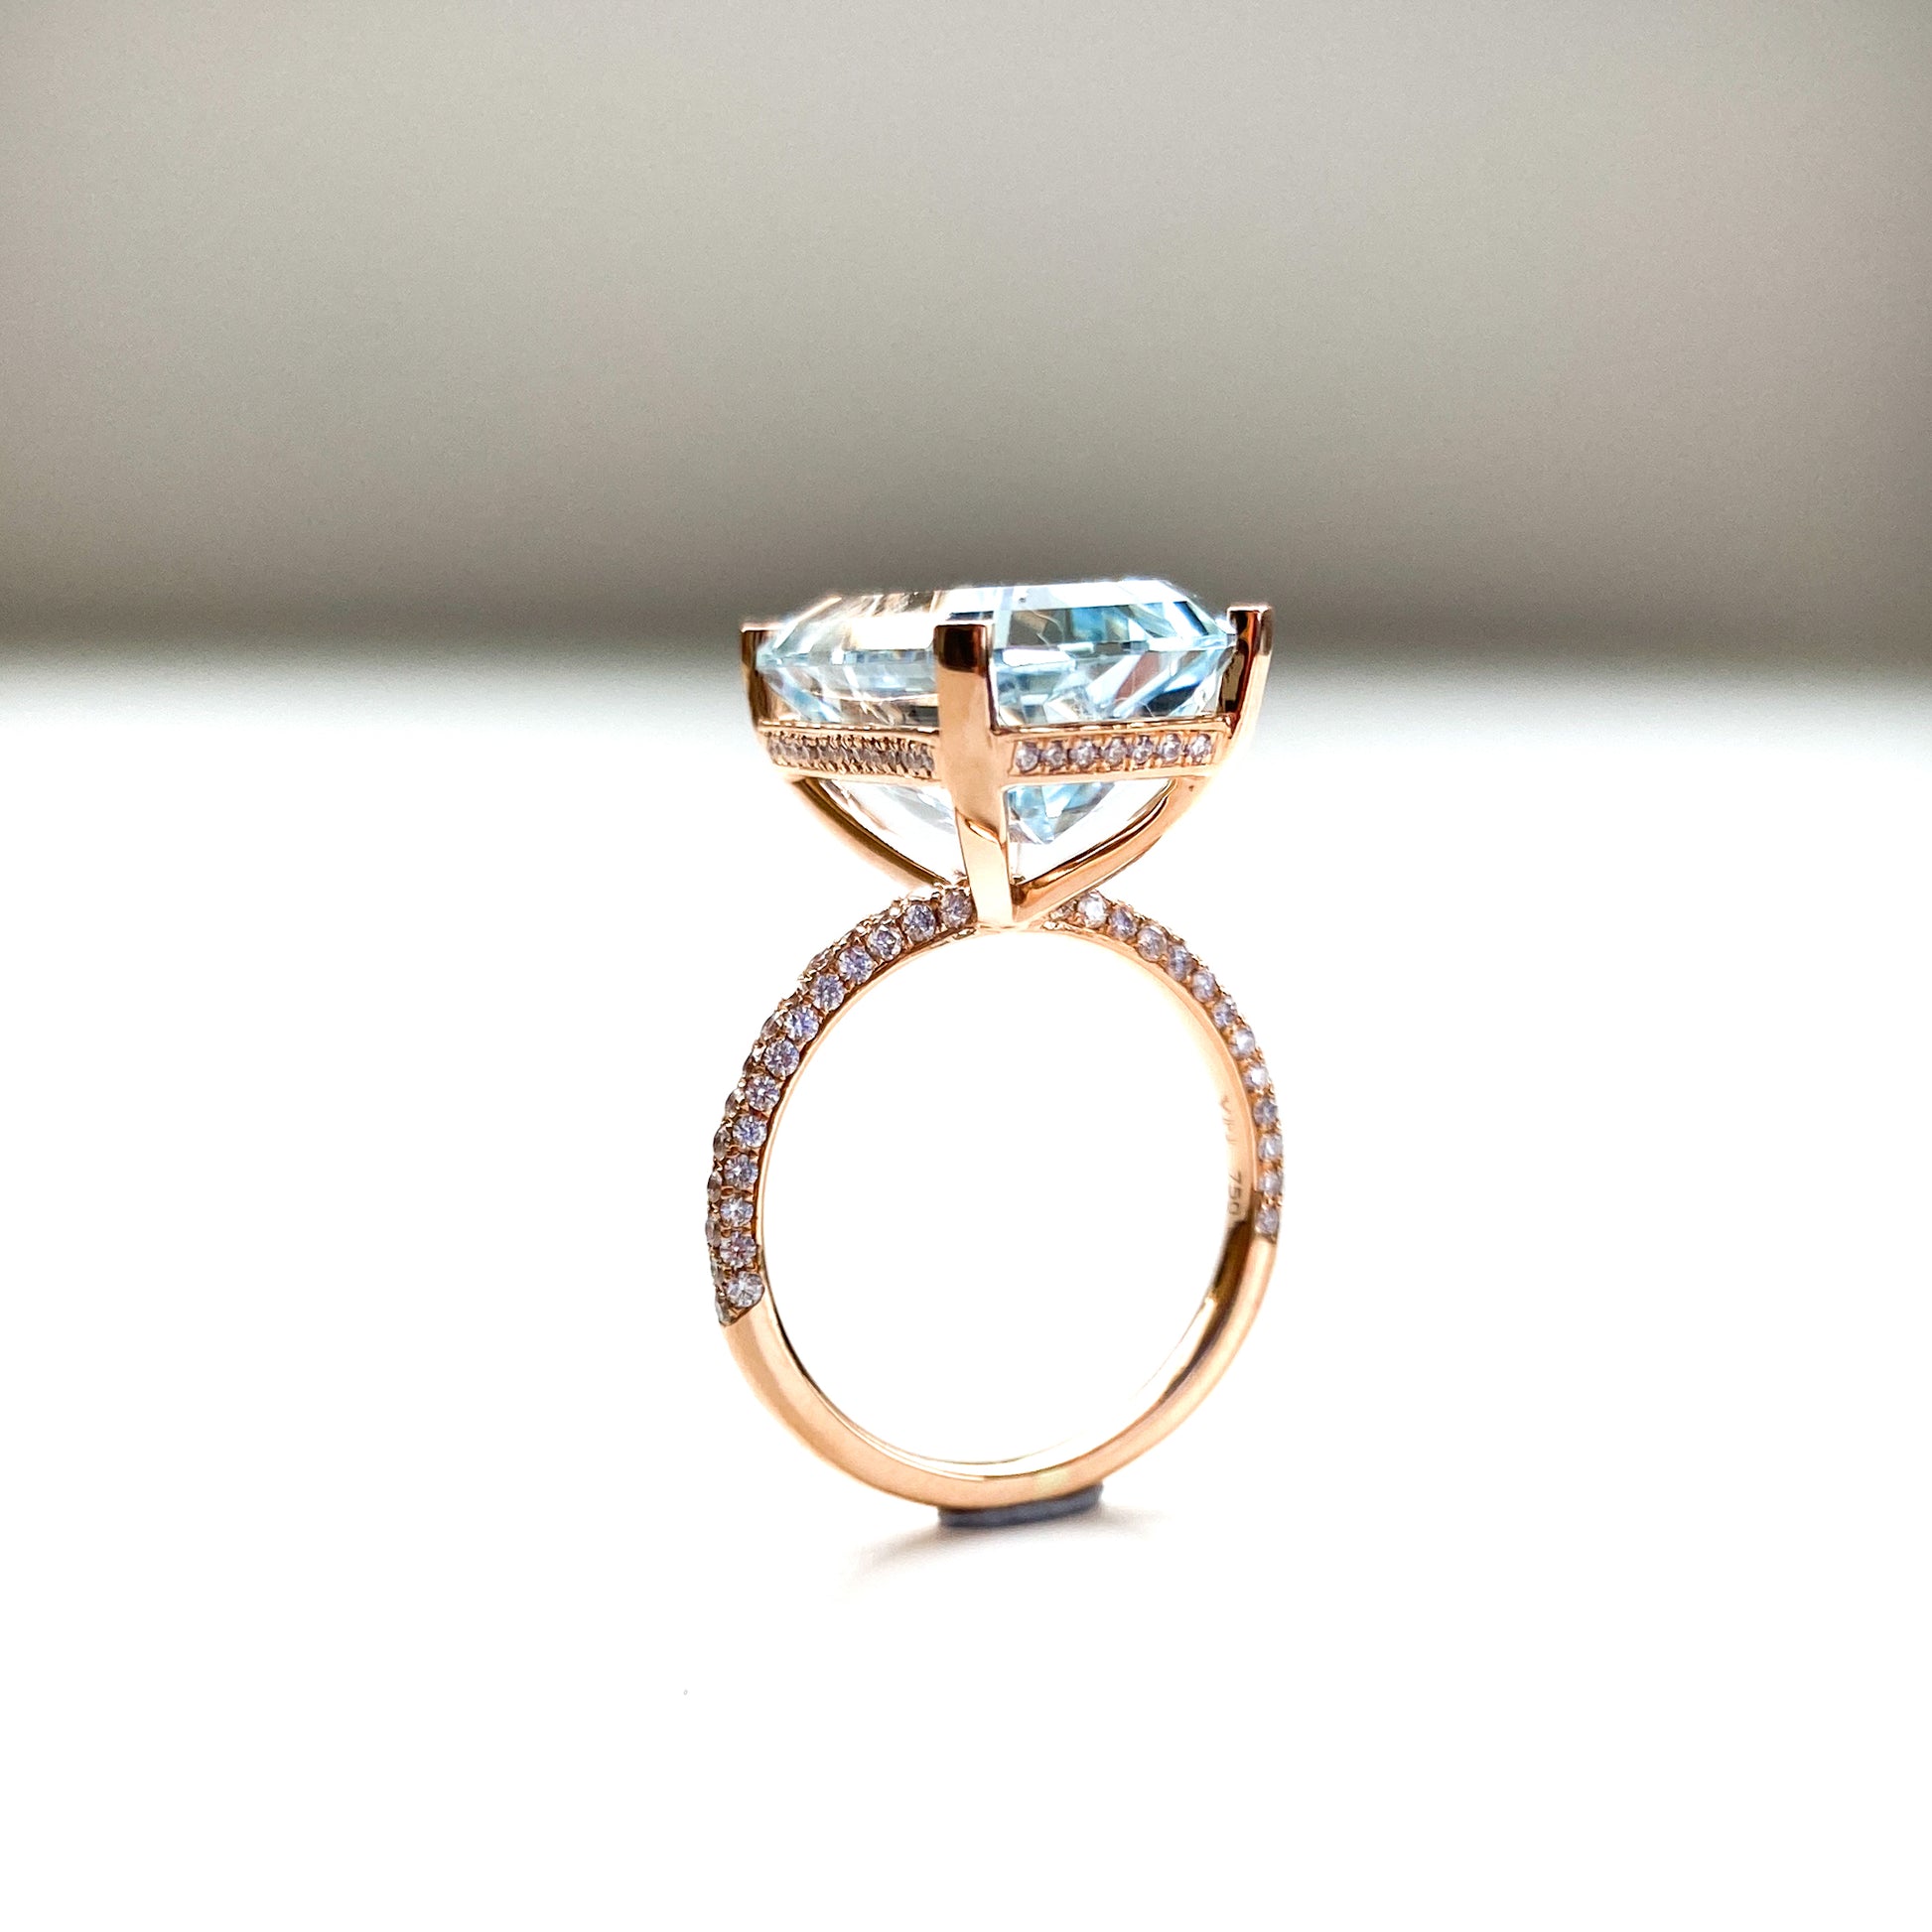 Aquamarine and Diamond cocktail ring in 18K Rose Gold